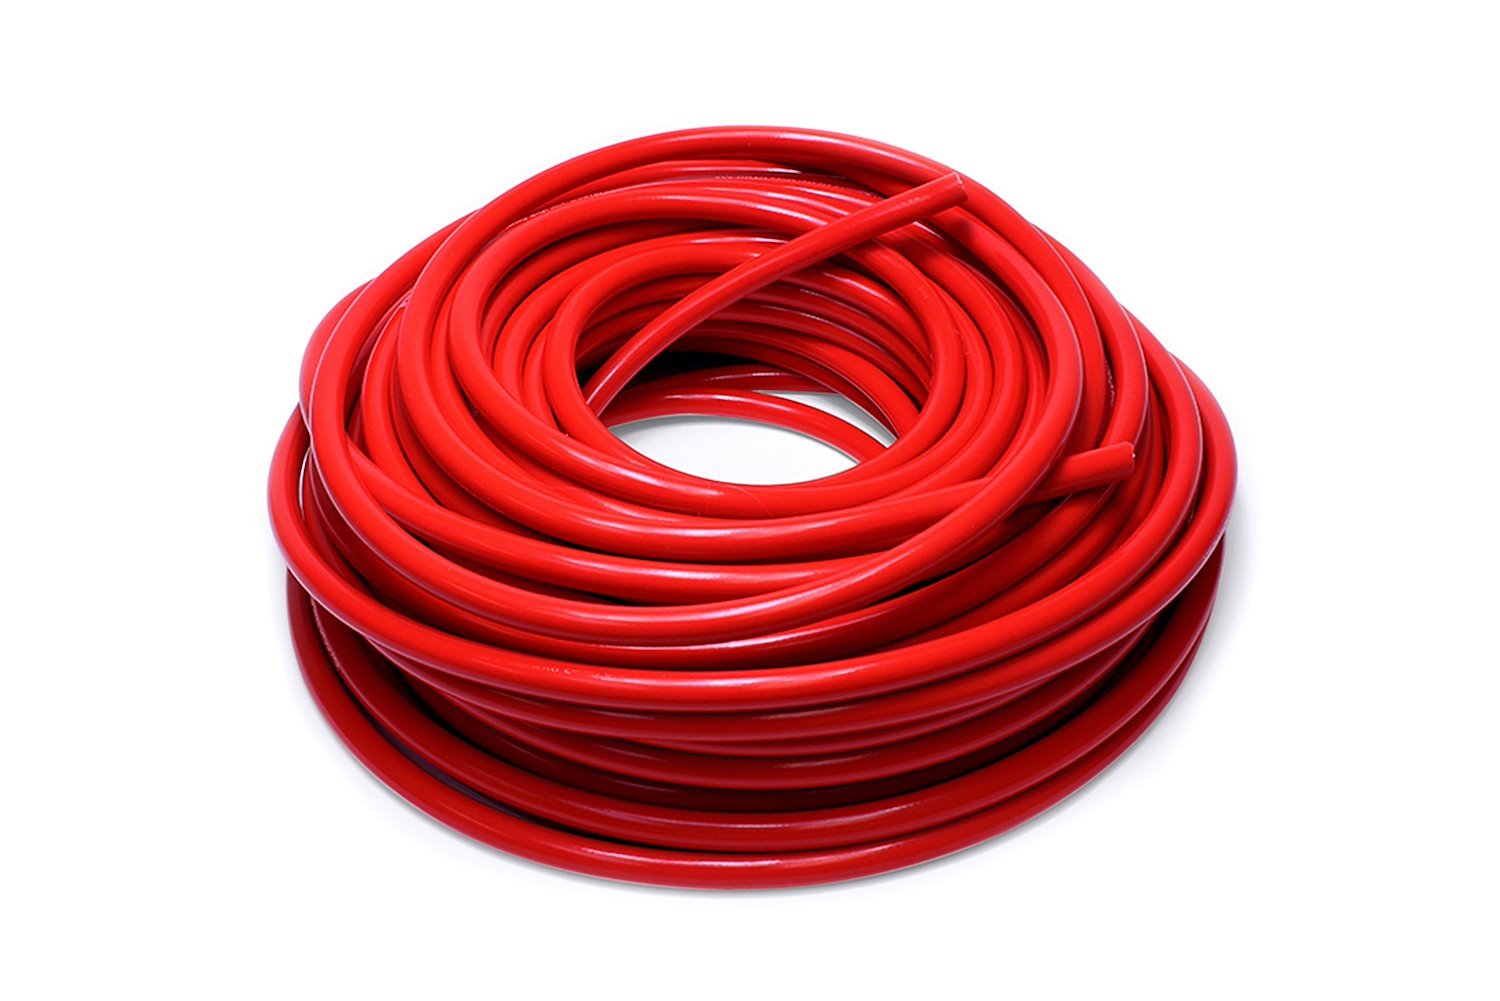 HTHH-062-REDx100 Silicone Heater Hose Tubing, High-Temp 1-Ply Reinforced, 5/8 in. ID, 100 ft. Roll, Red